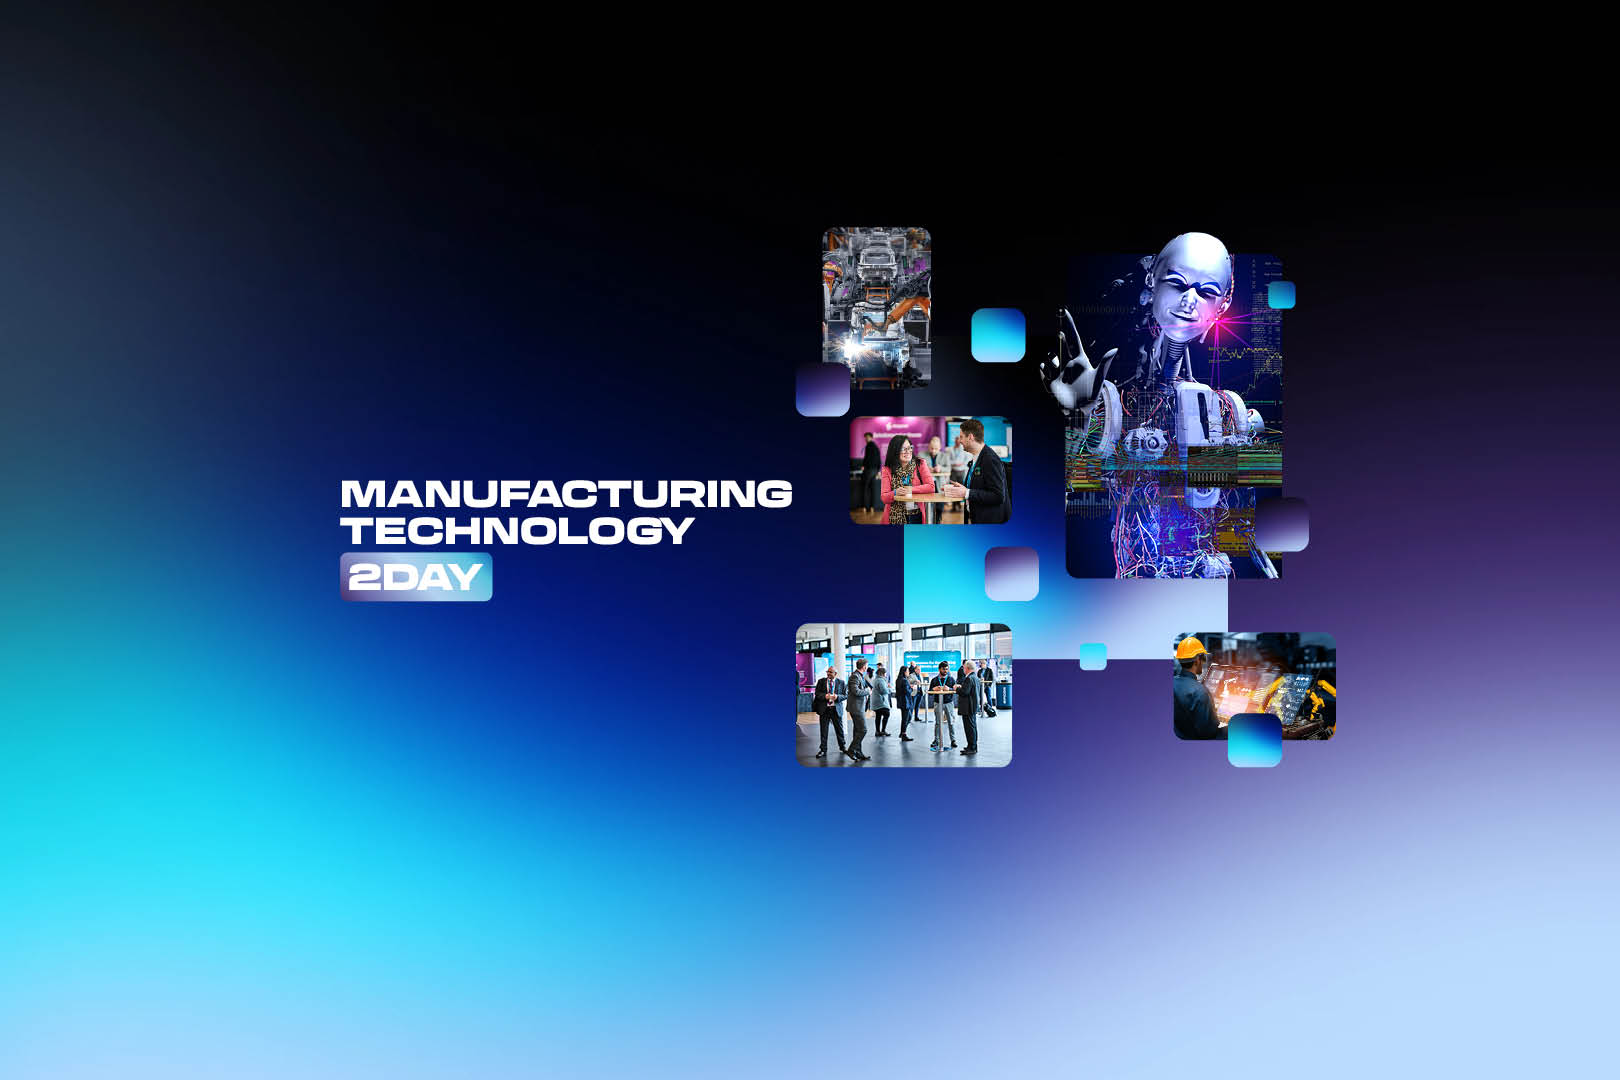 Manufacturing Technology 2Day event brand goes live for MTC